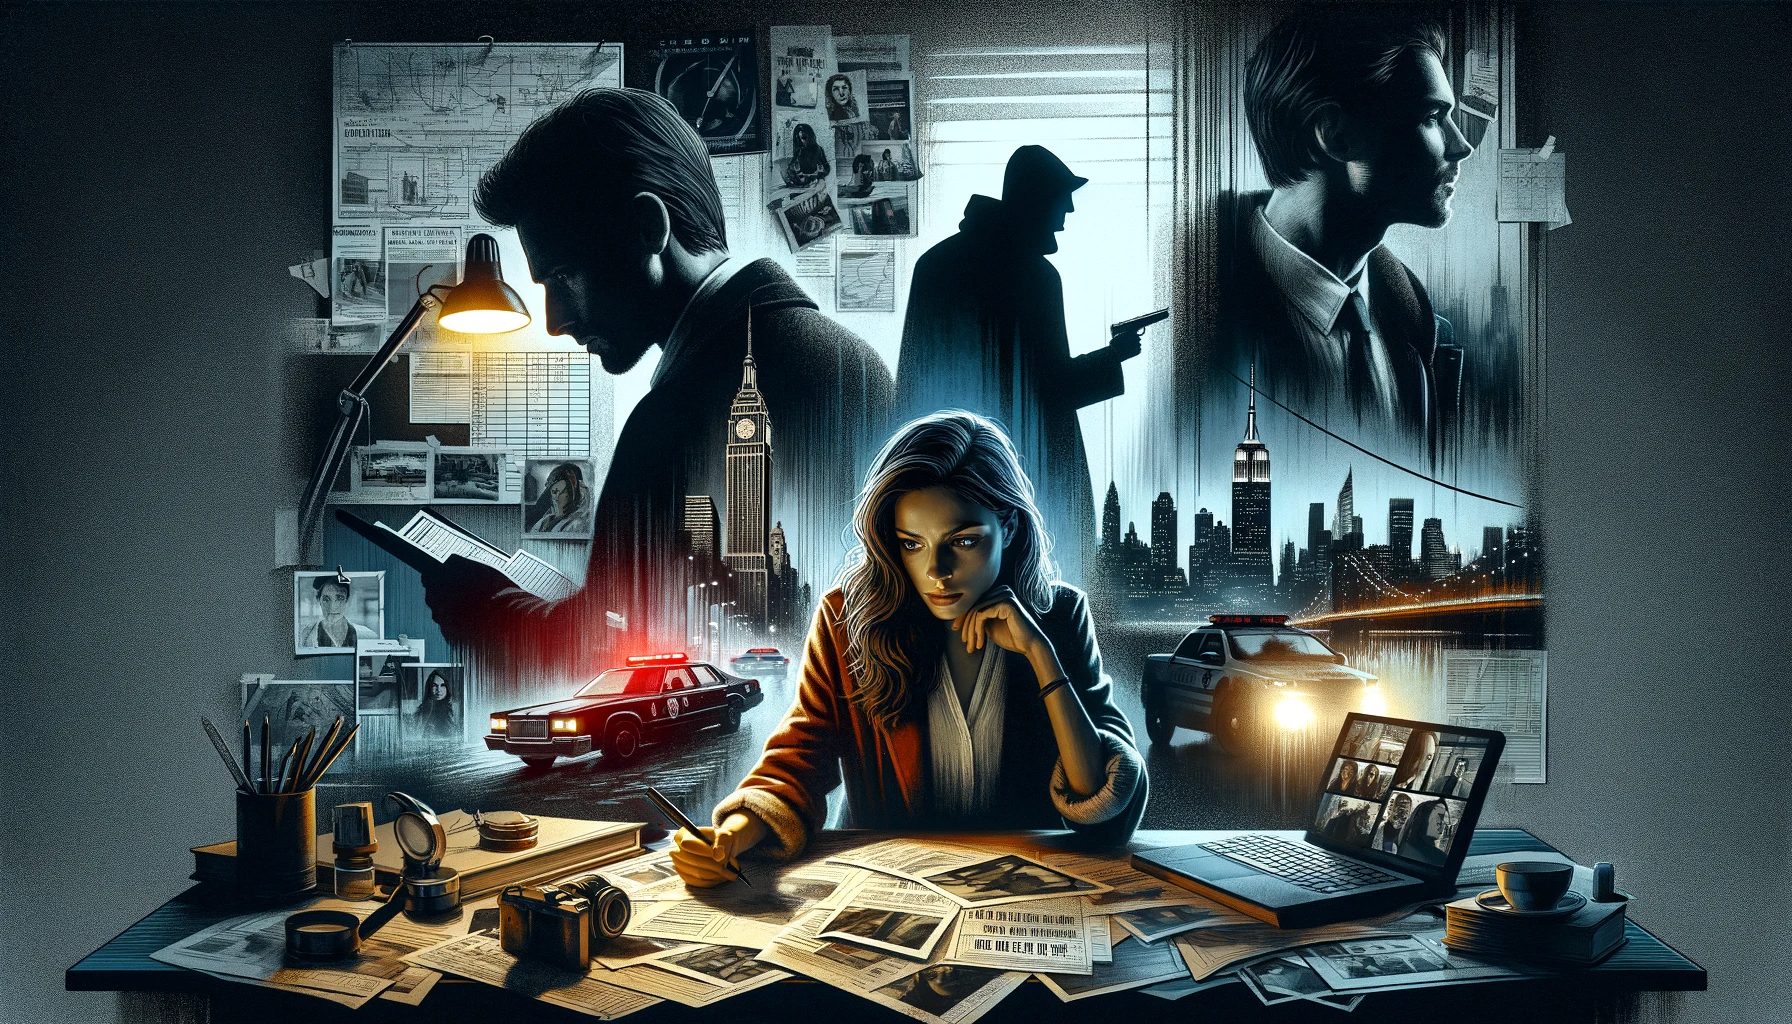 Shadows of Truth: Crime & Mystery Imagined by CriticWise